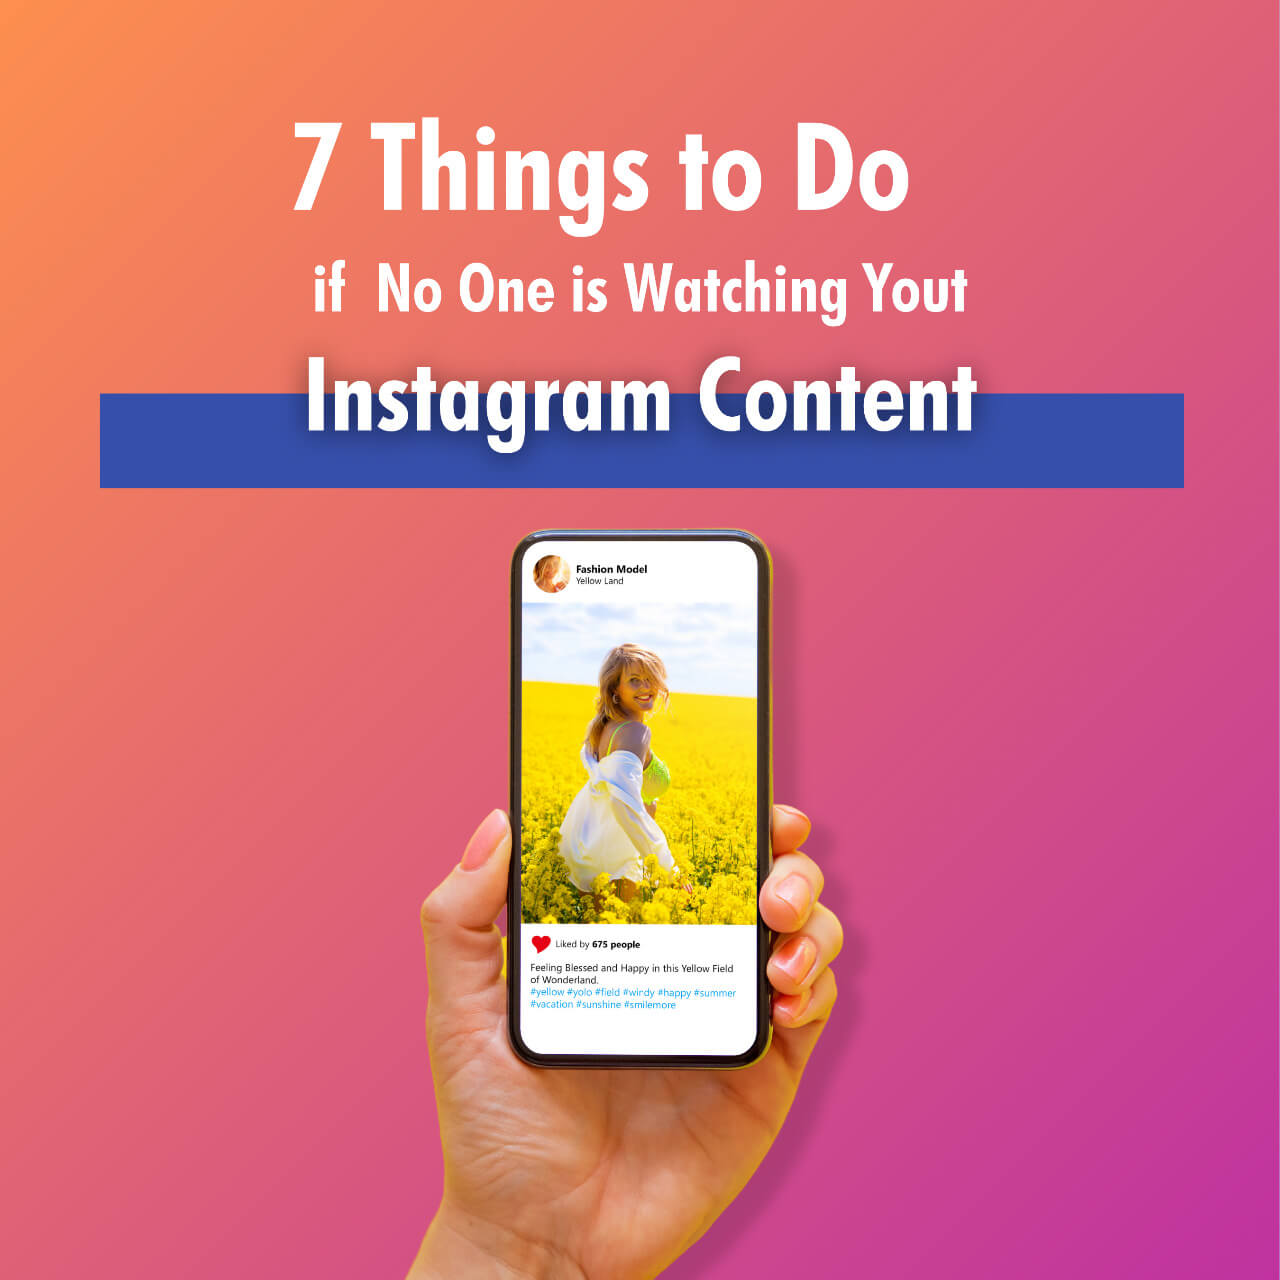 7 Things to Do if No One is Watching Your Instagram Content